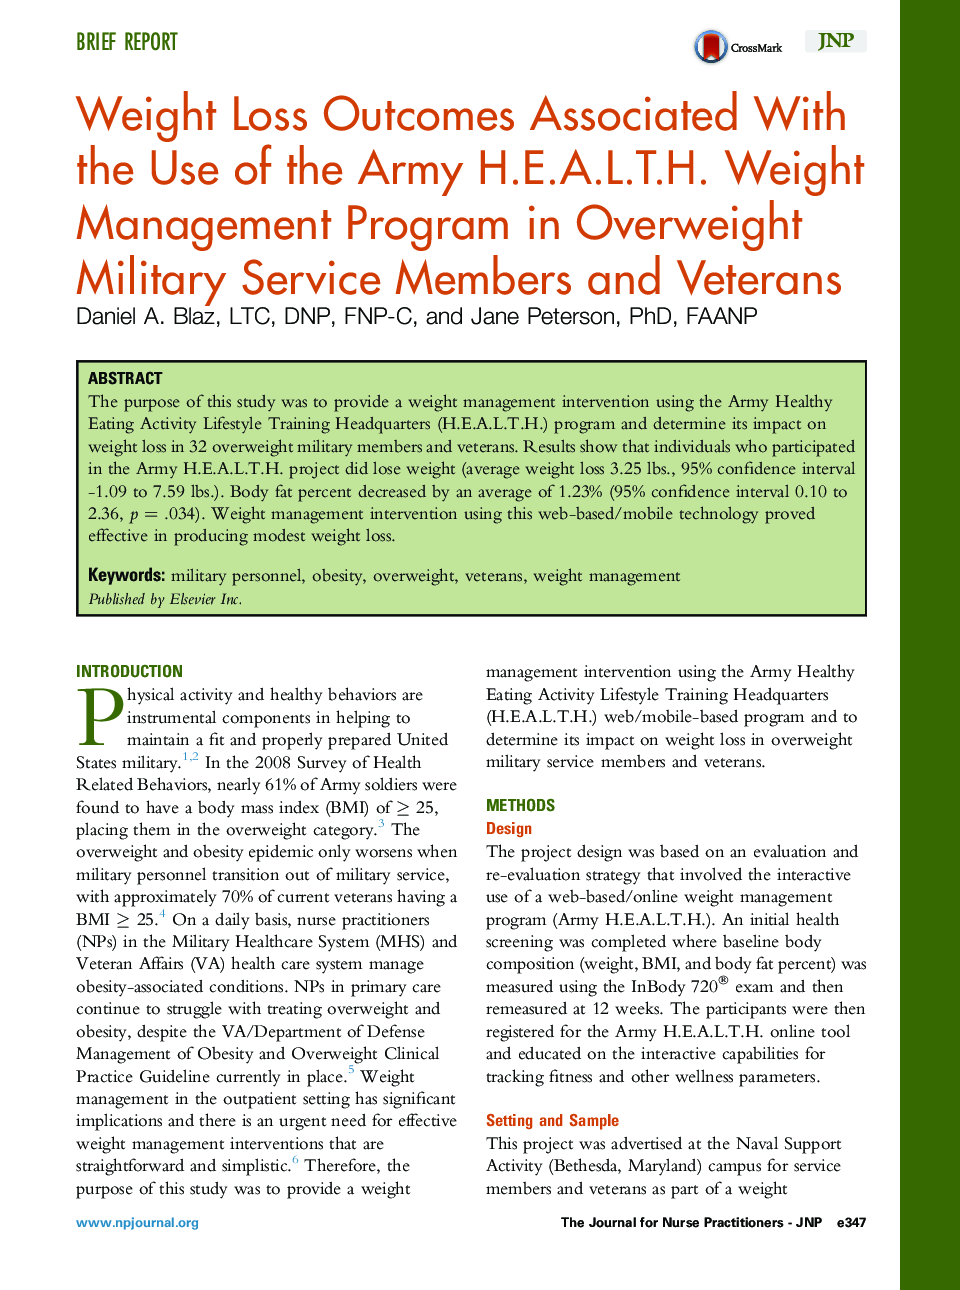 Weight Loss Outcomes Associated With the Use of the Army H.E.A.L.T.H. Weight Management Program in Overweight Military Service Members and Veterans 